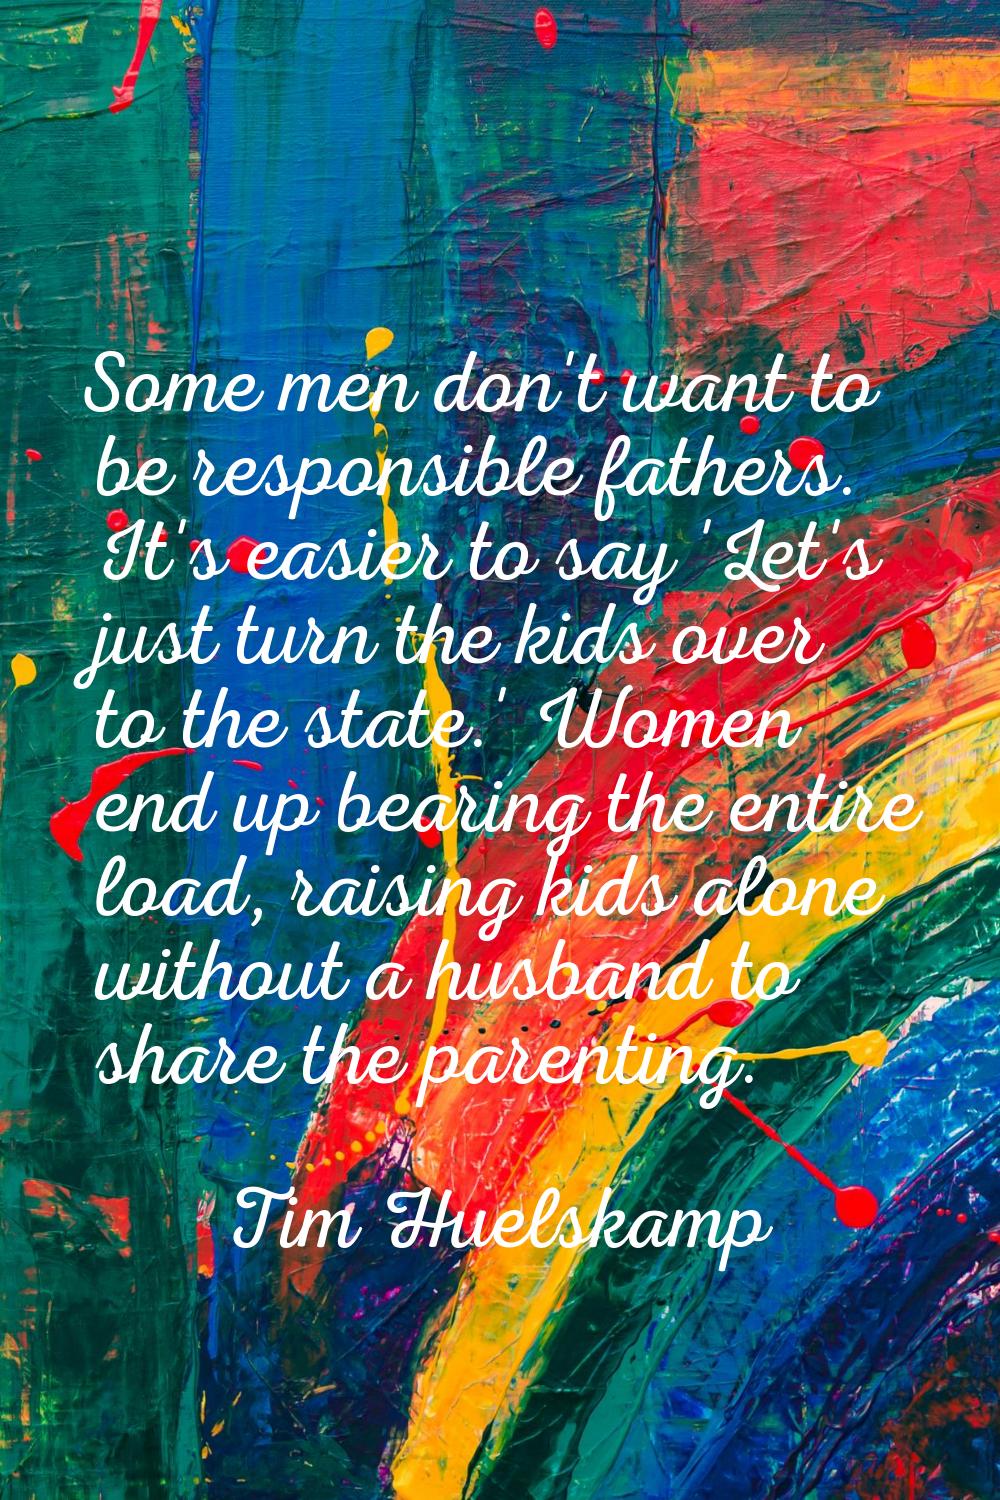 Some men don't want to be responsible fathers. It's easier to say 'Let's just turn the kids over to